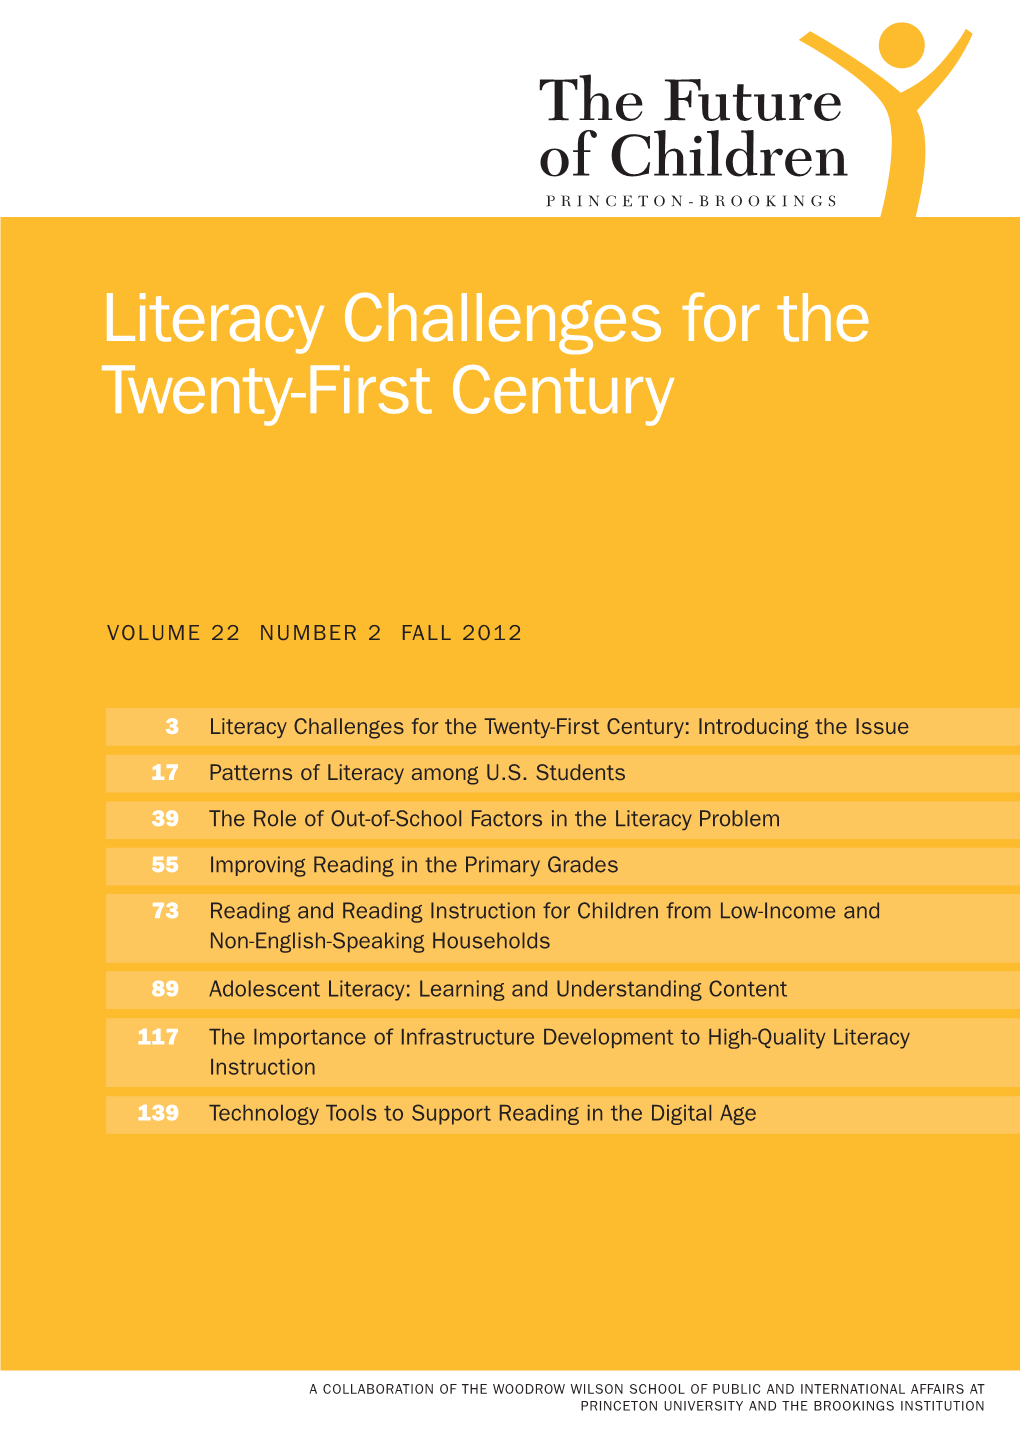 Literacy Challenges for the Twenty-First Century